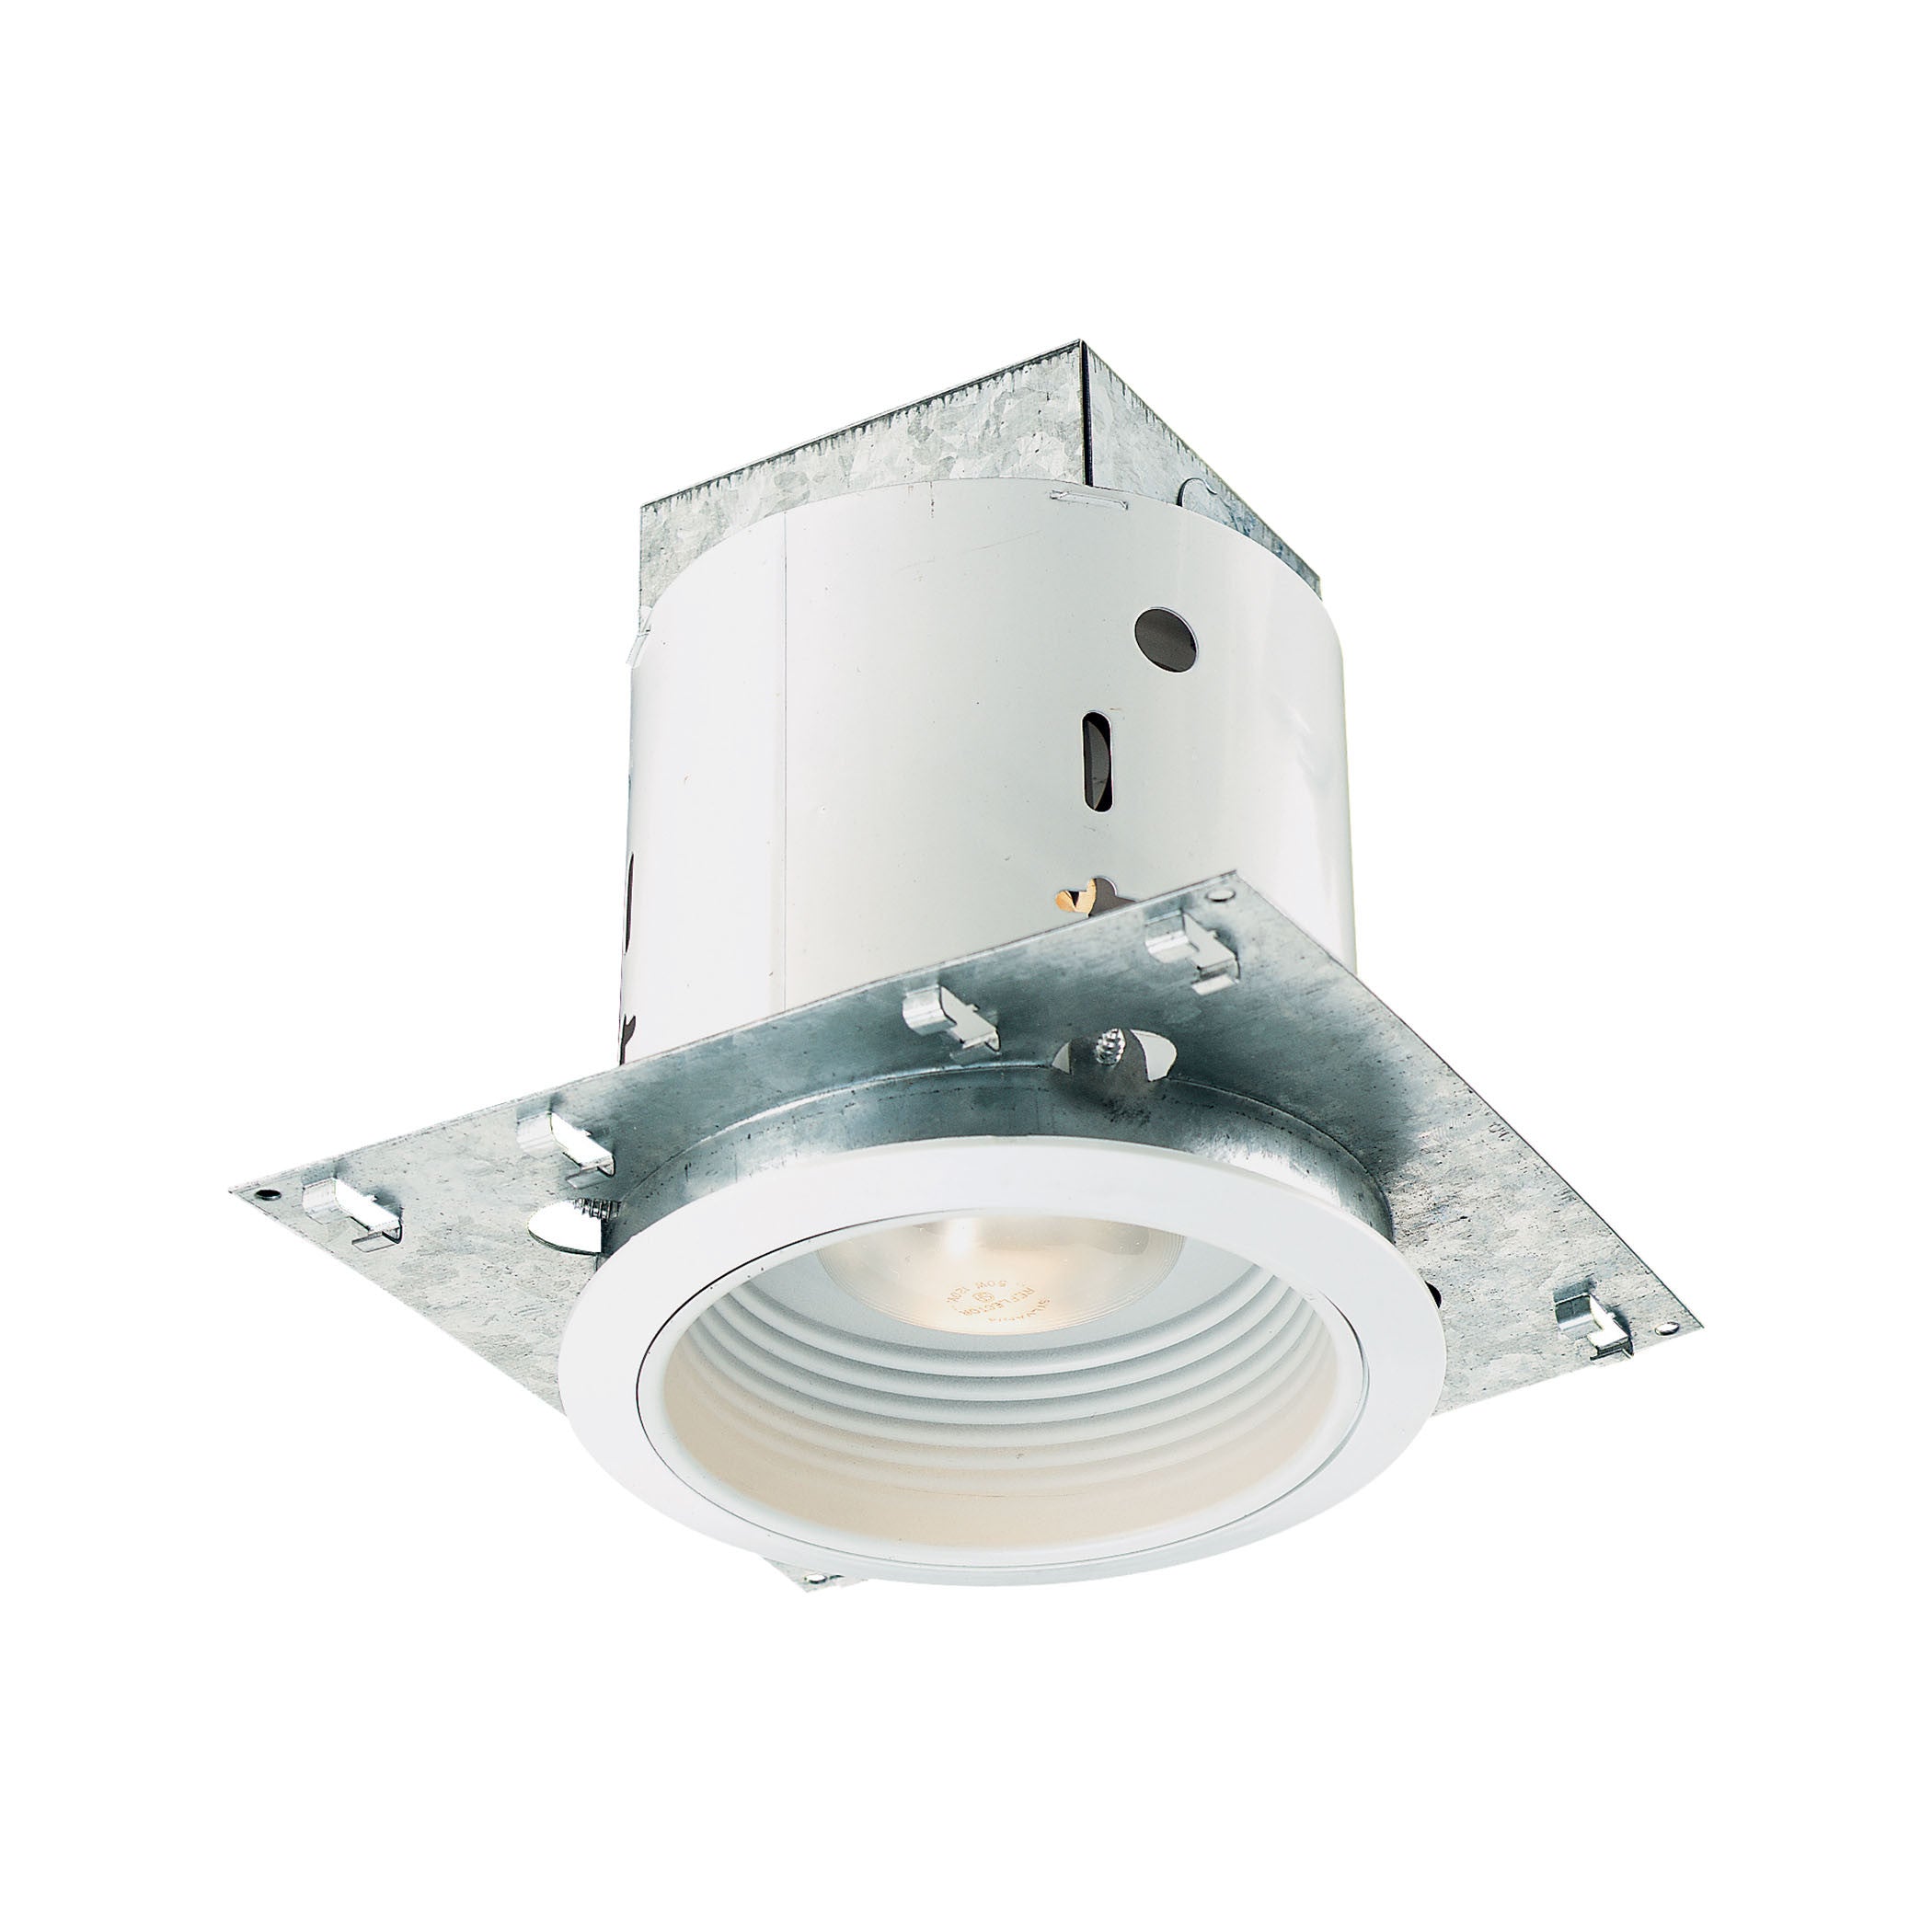 Thomas Lighting Dy64098 Recessed Kit Collection Matte White Finish Transitional Recessed